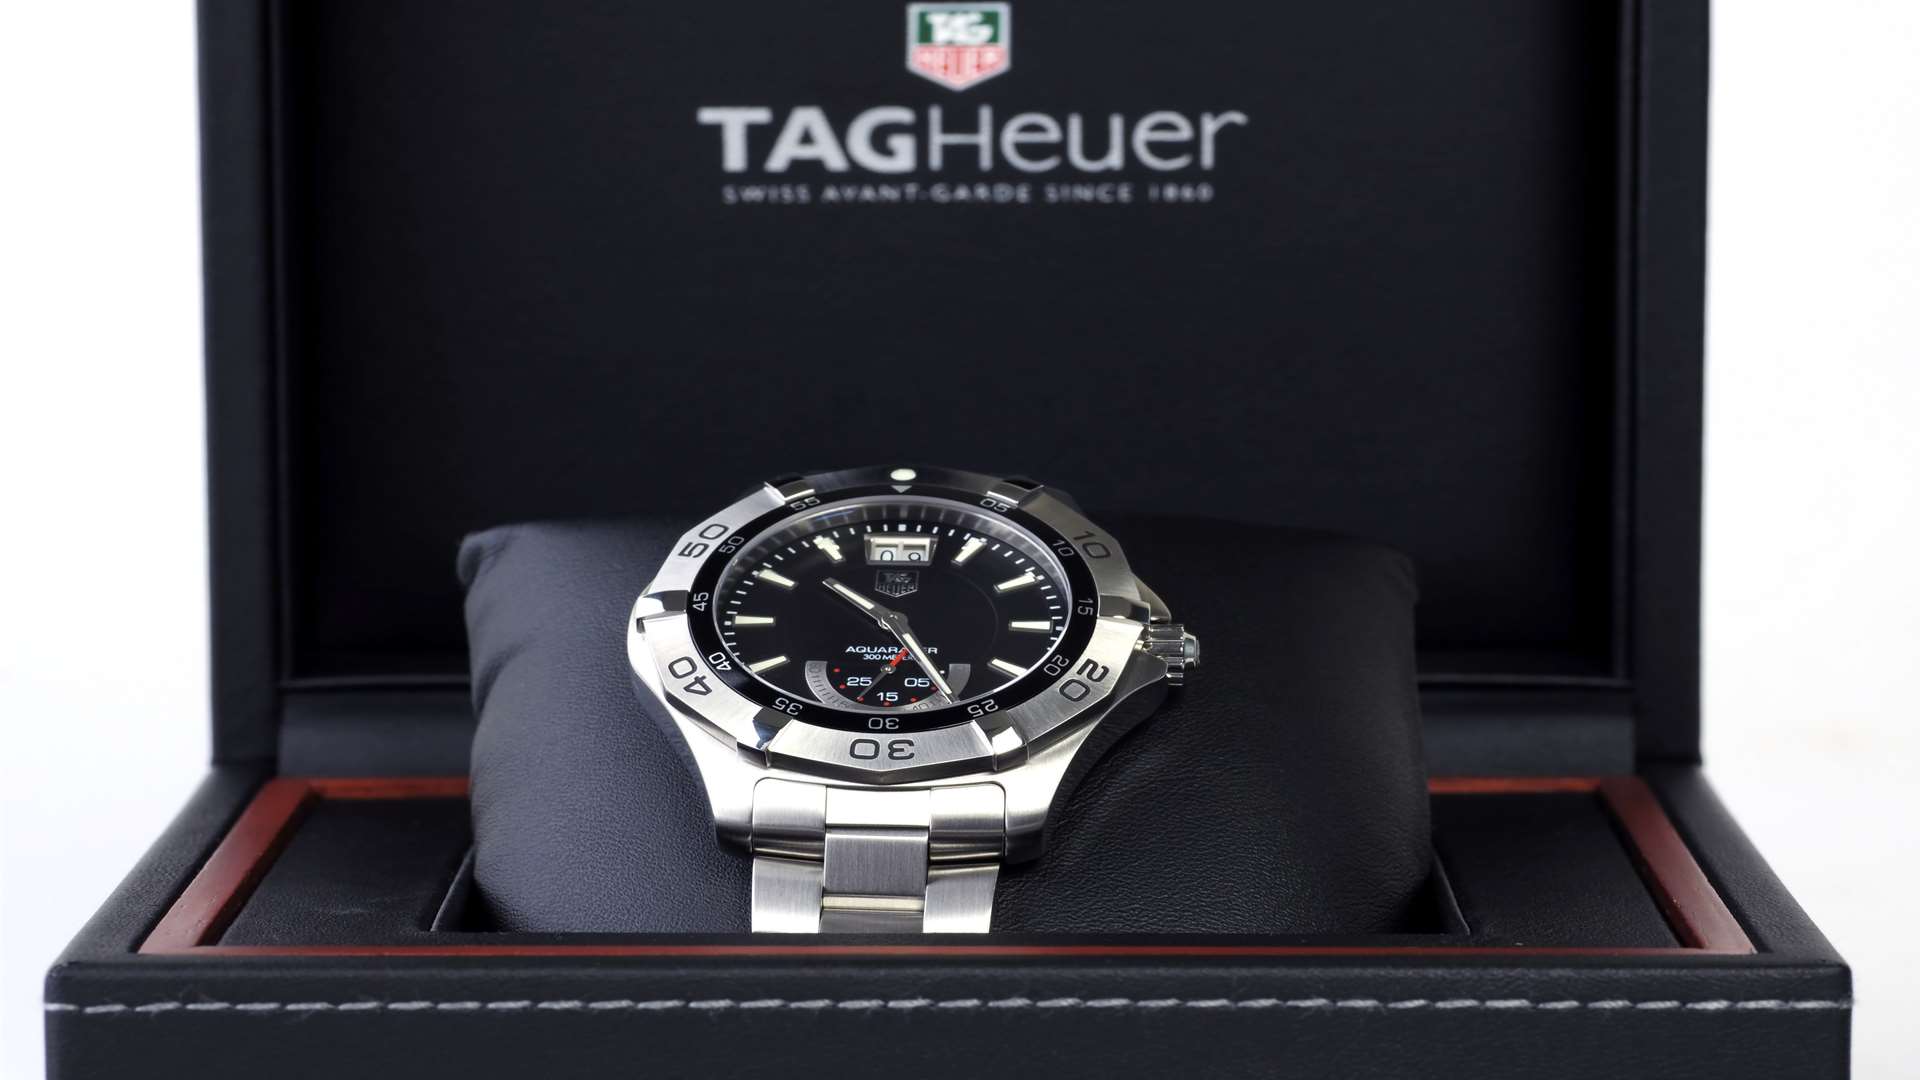 Tag Heuer watch. For illustrative purposes only.